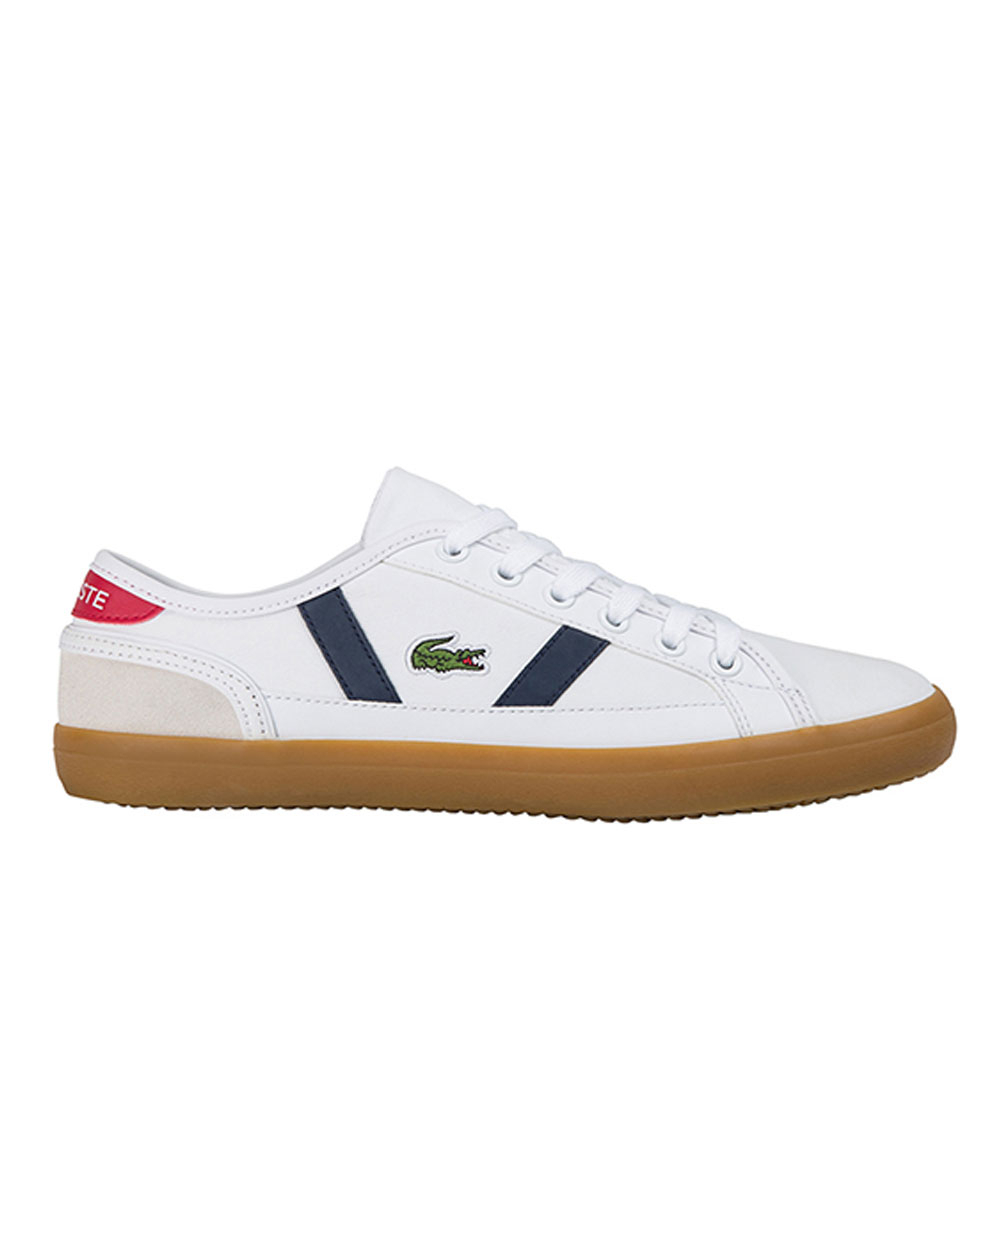 Lacoste Sideline 0120 2 CMA (white/navy/red)